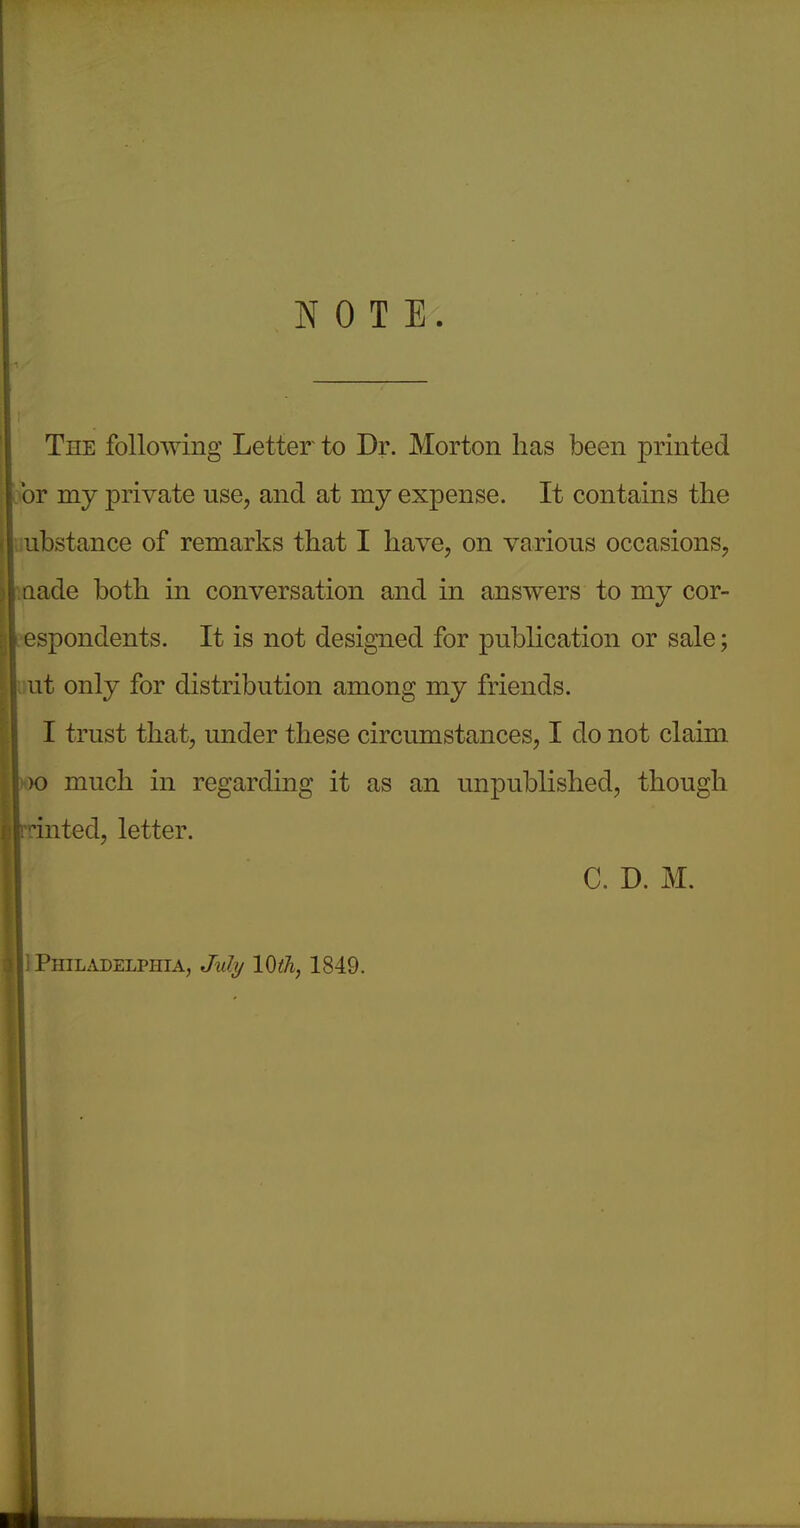 NOTE. The following Letter to Dr. Morton has been printed or my private use, and at mj expense. It contains the ubstance of remarks that I have, on various occasions, acle both in conversation and in answers to my cor- _spondents. It is not designed for publication or sale; ut only for distribution among my friends. I trust that, under these circumstances, I clo not claim much in regarding it as an unpublished, though 'nted, letter. C. D. M. 1 Philadelphia, July 10th, 1849.